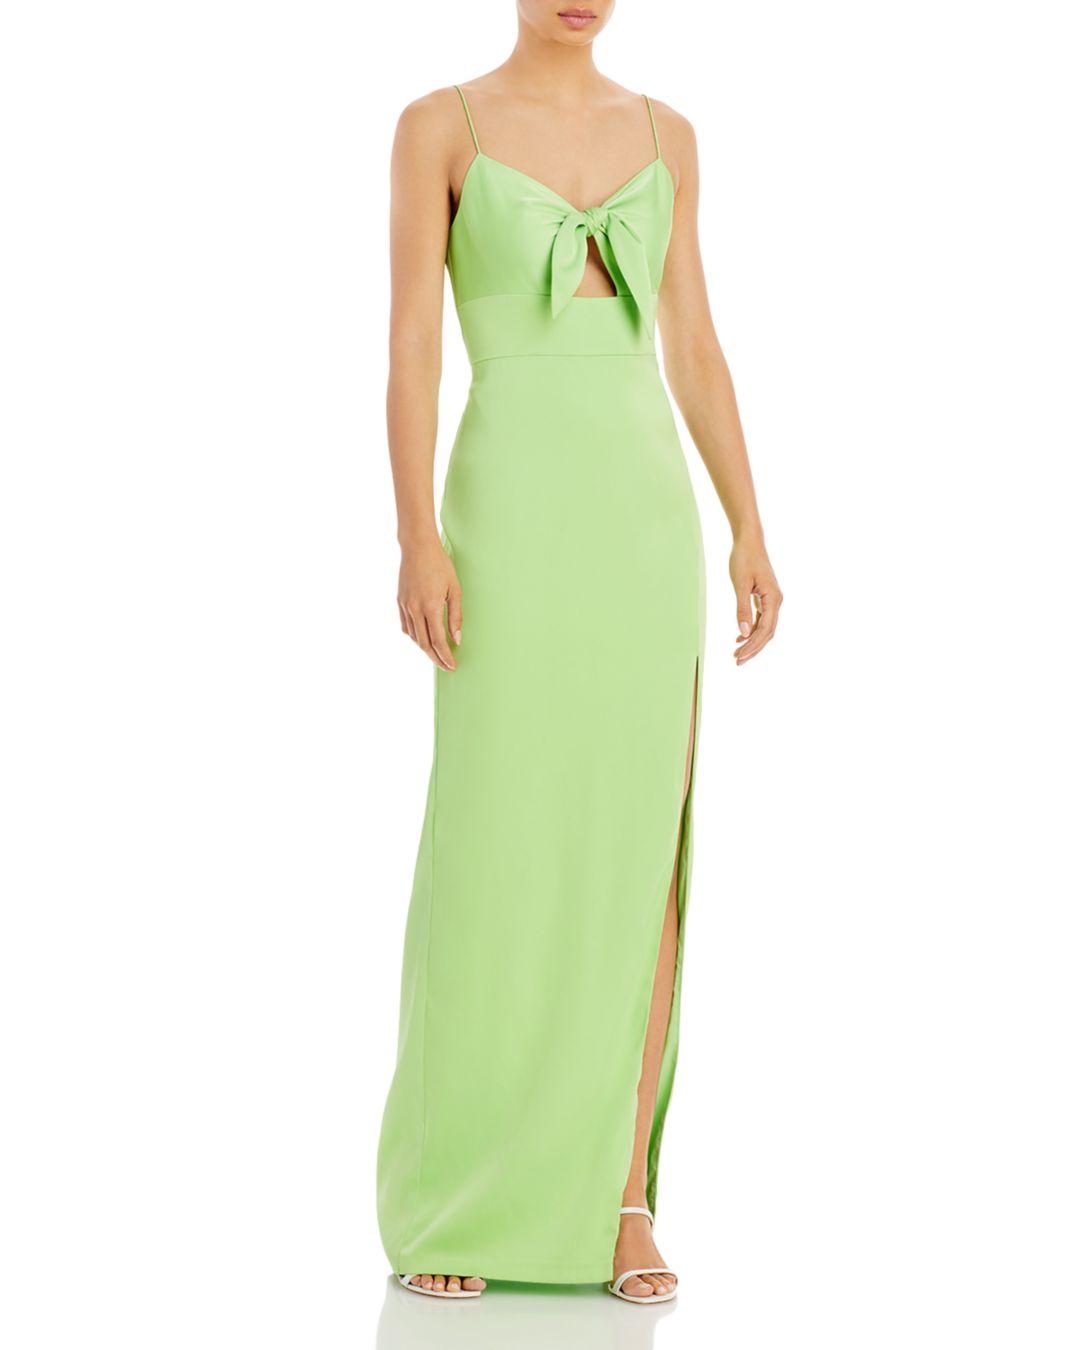 Aidan By Aidan Mattox Synthetic Tie Front Bodice Column Gown in Lime Green